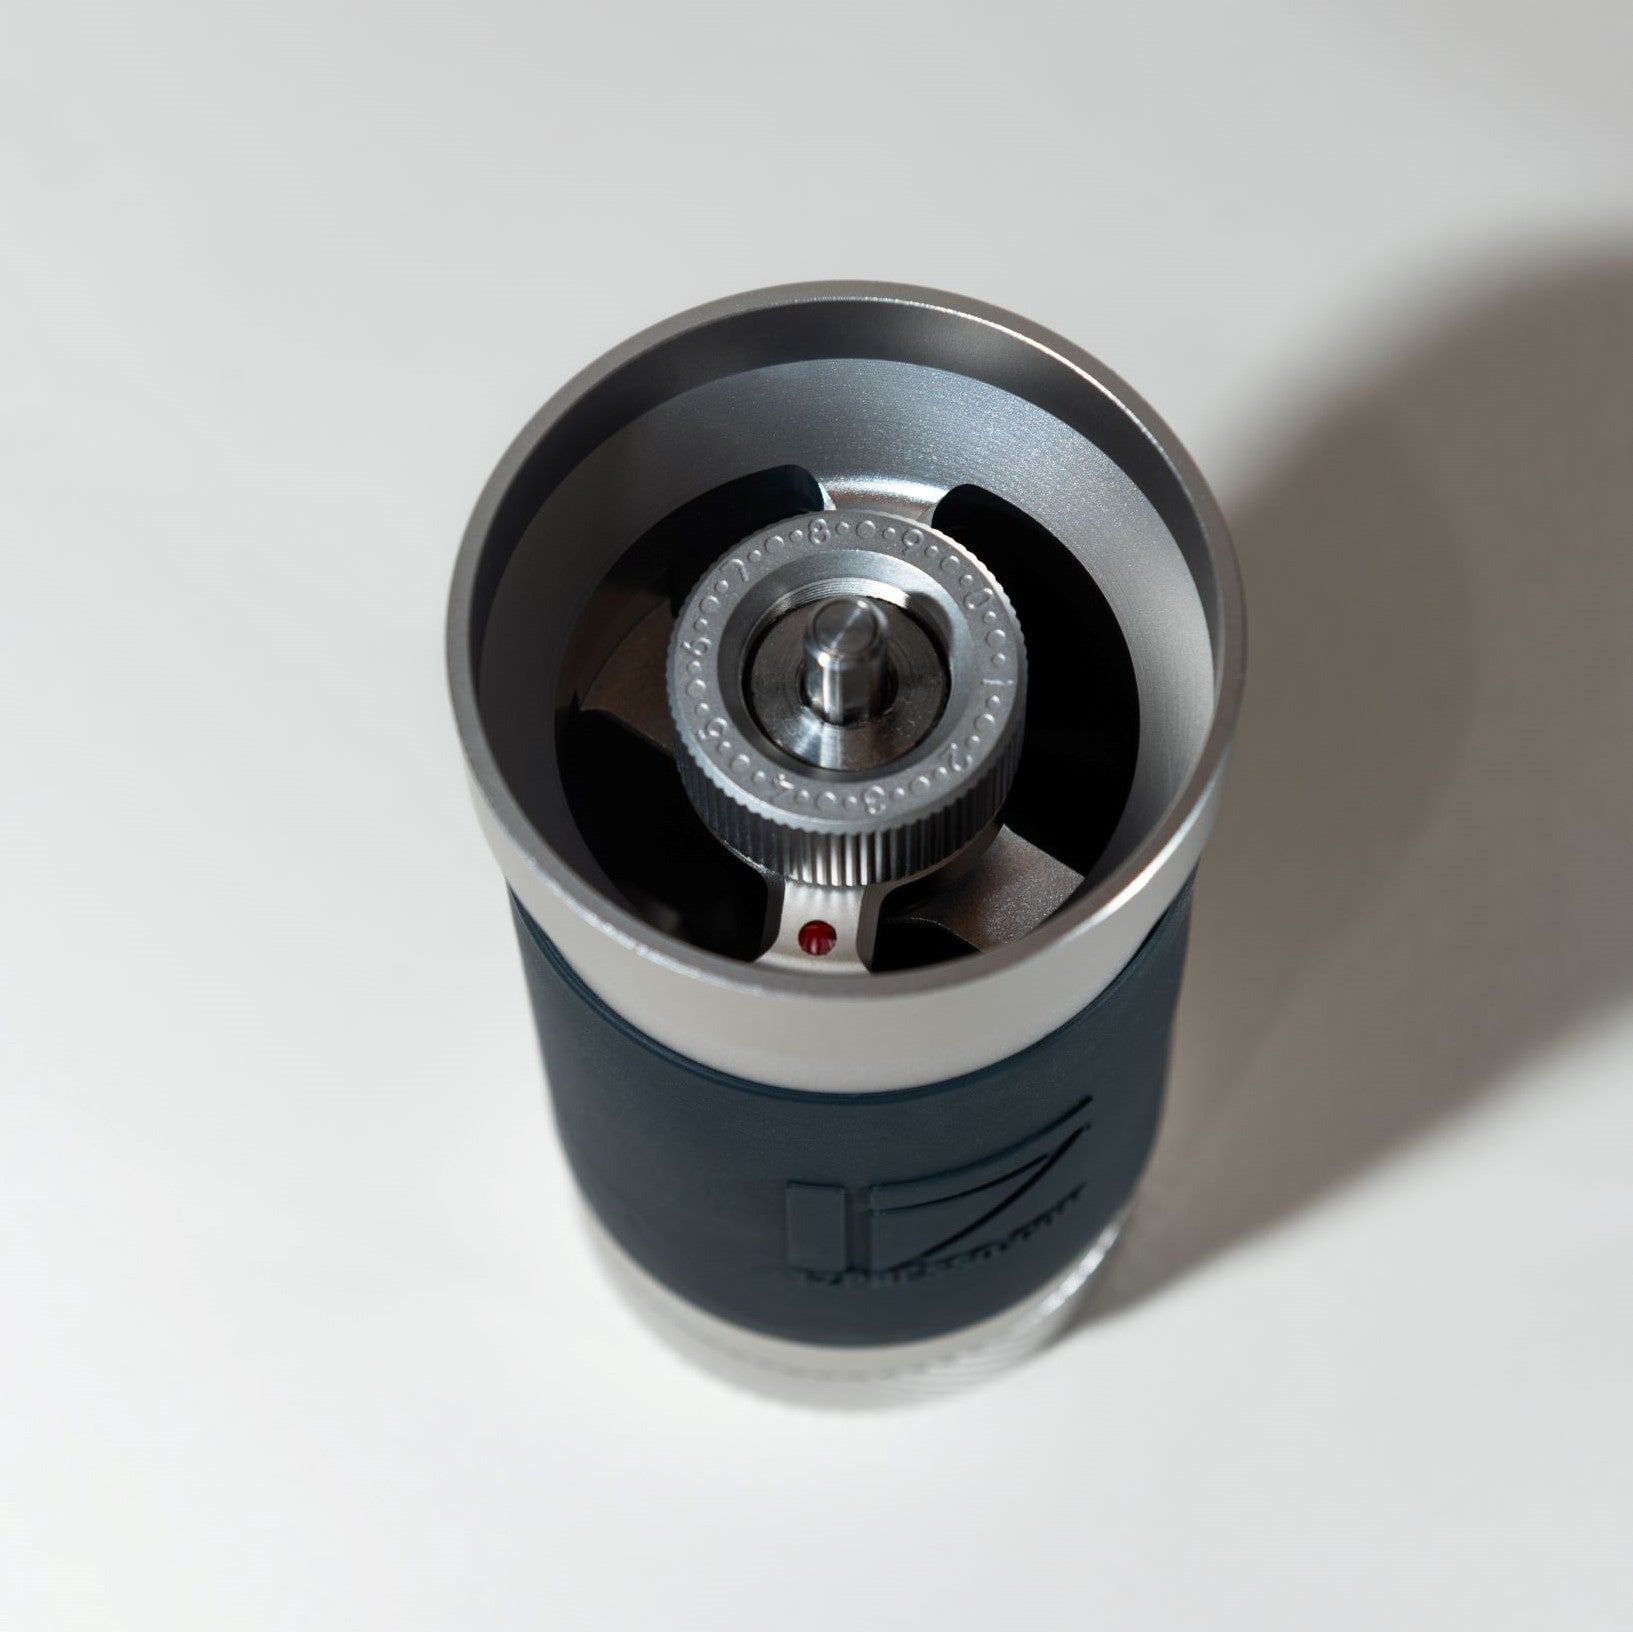 JX Pro hand grinder. Manual Grinder in silver. Viewing the top of the chamber where you insert coffee beans